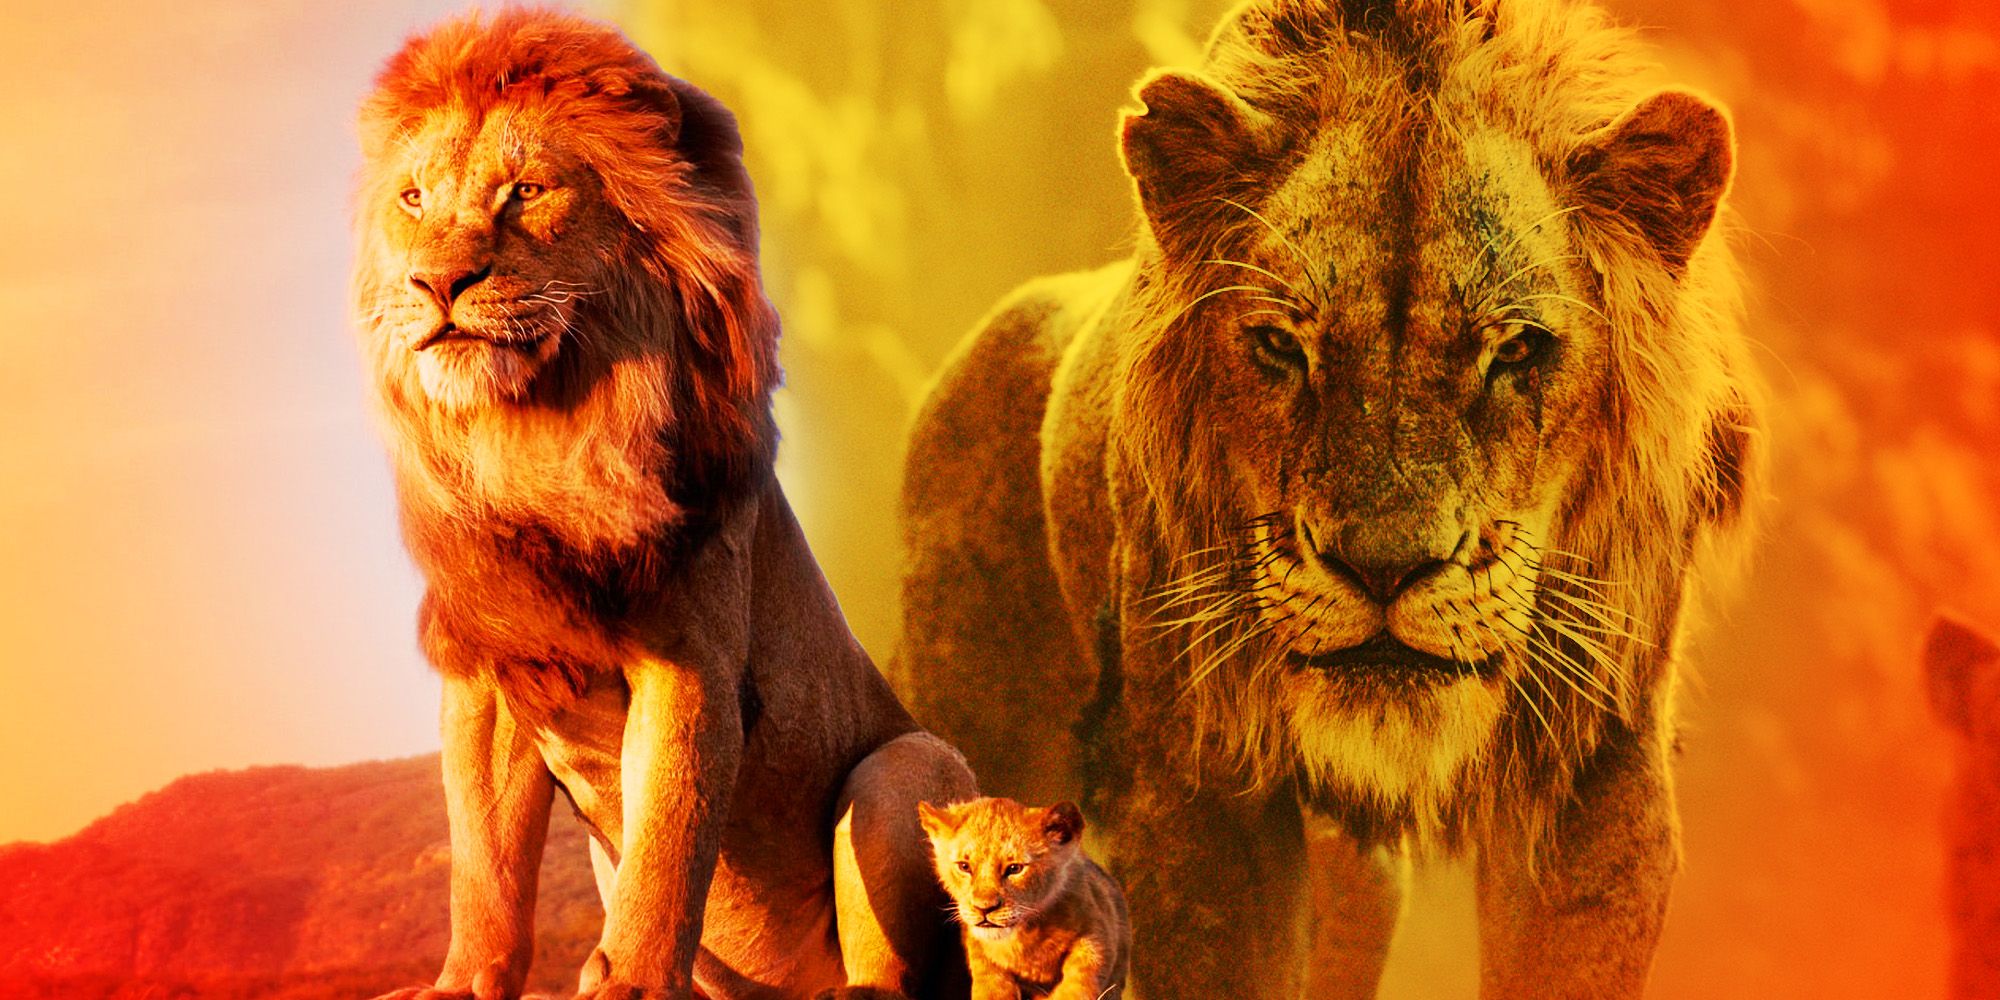 Mufasa, Simba, and Scar in Lion King 2019